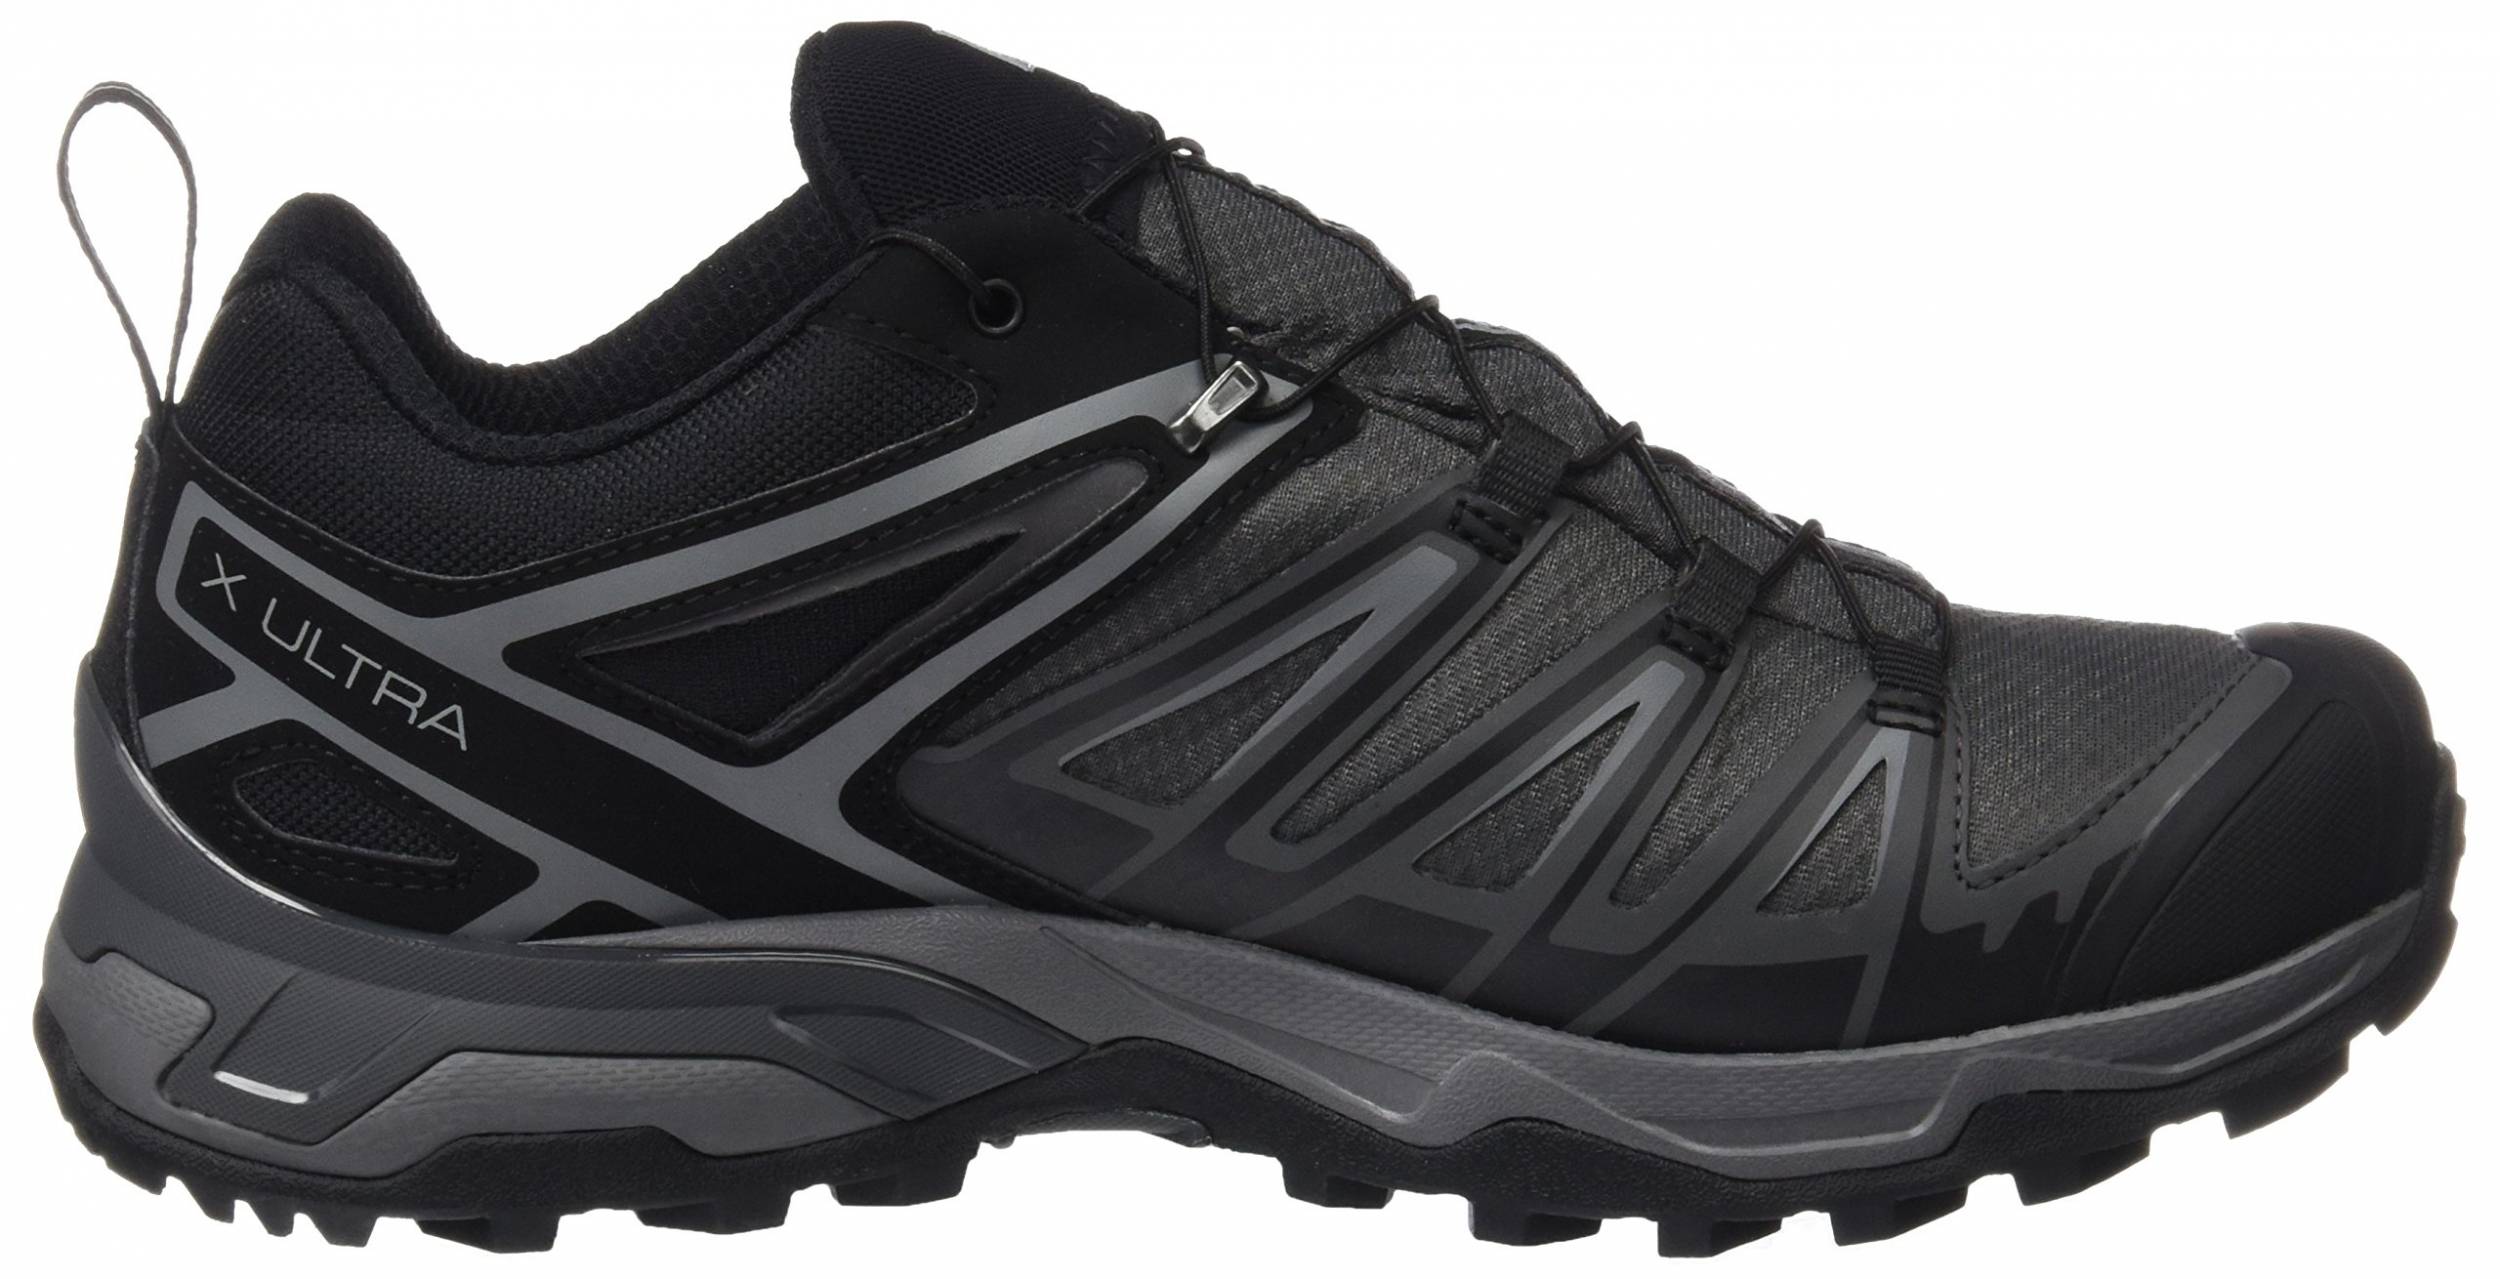 Recreation linear lips salomon ultra 3 gtx decathlon Today's Deals- OFF-51% >Free Delivery